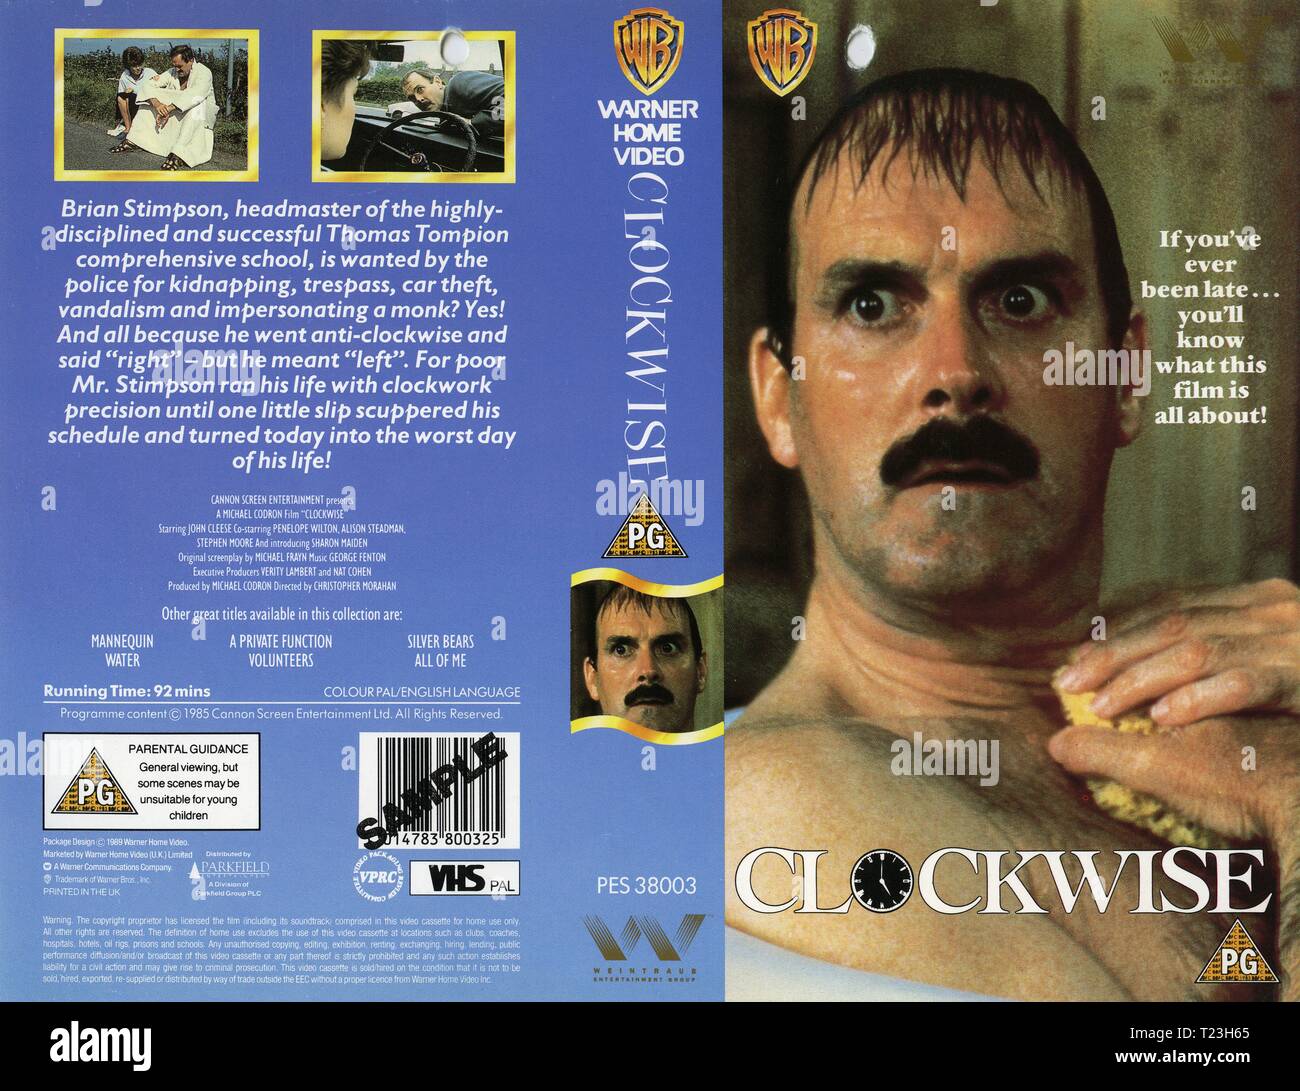 Clockwise (1986) John Cleese, Publicity information, Date: 1986 Stock Photo  - Alamy